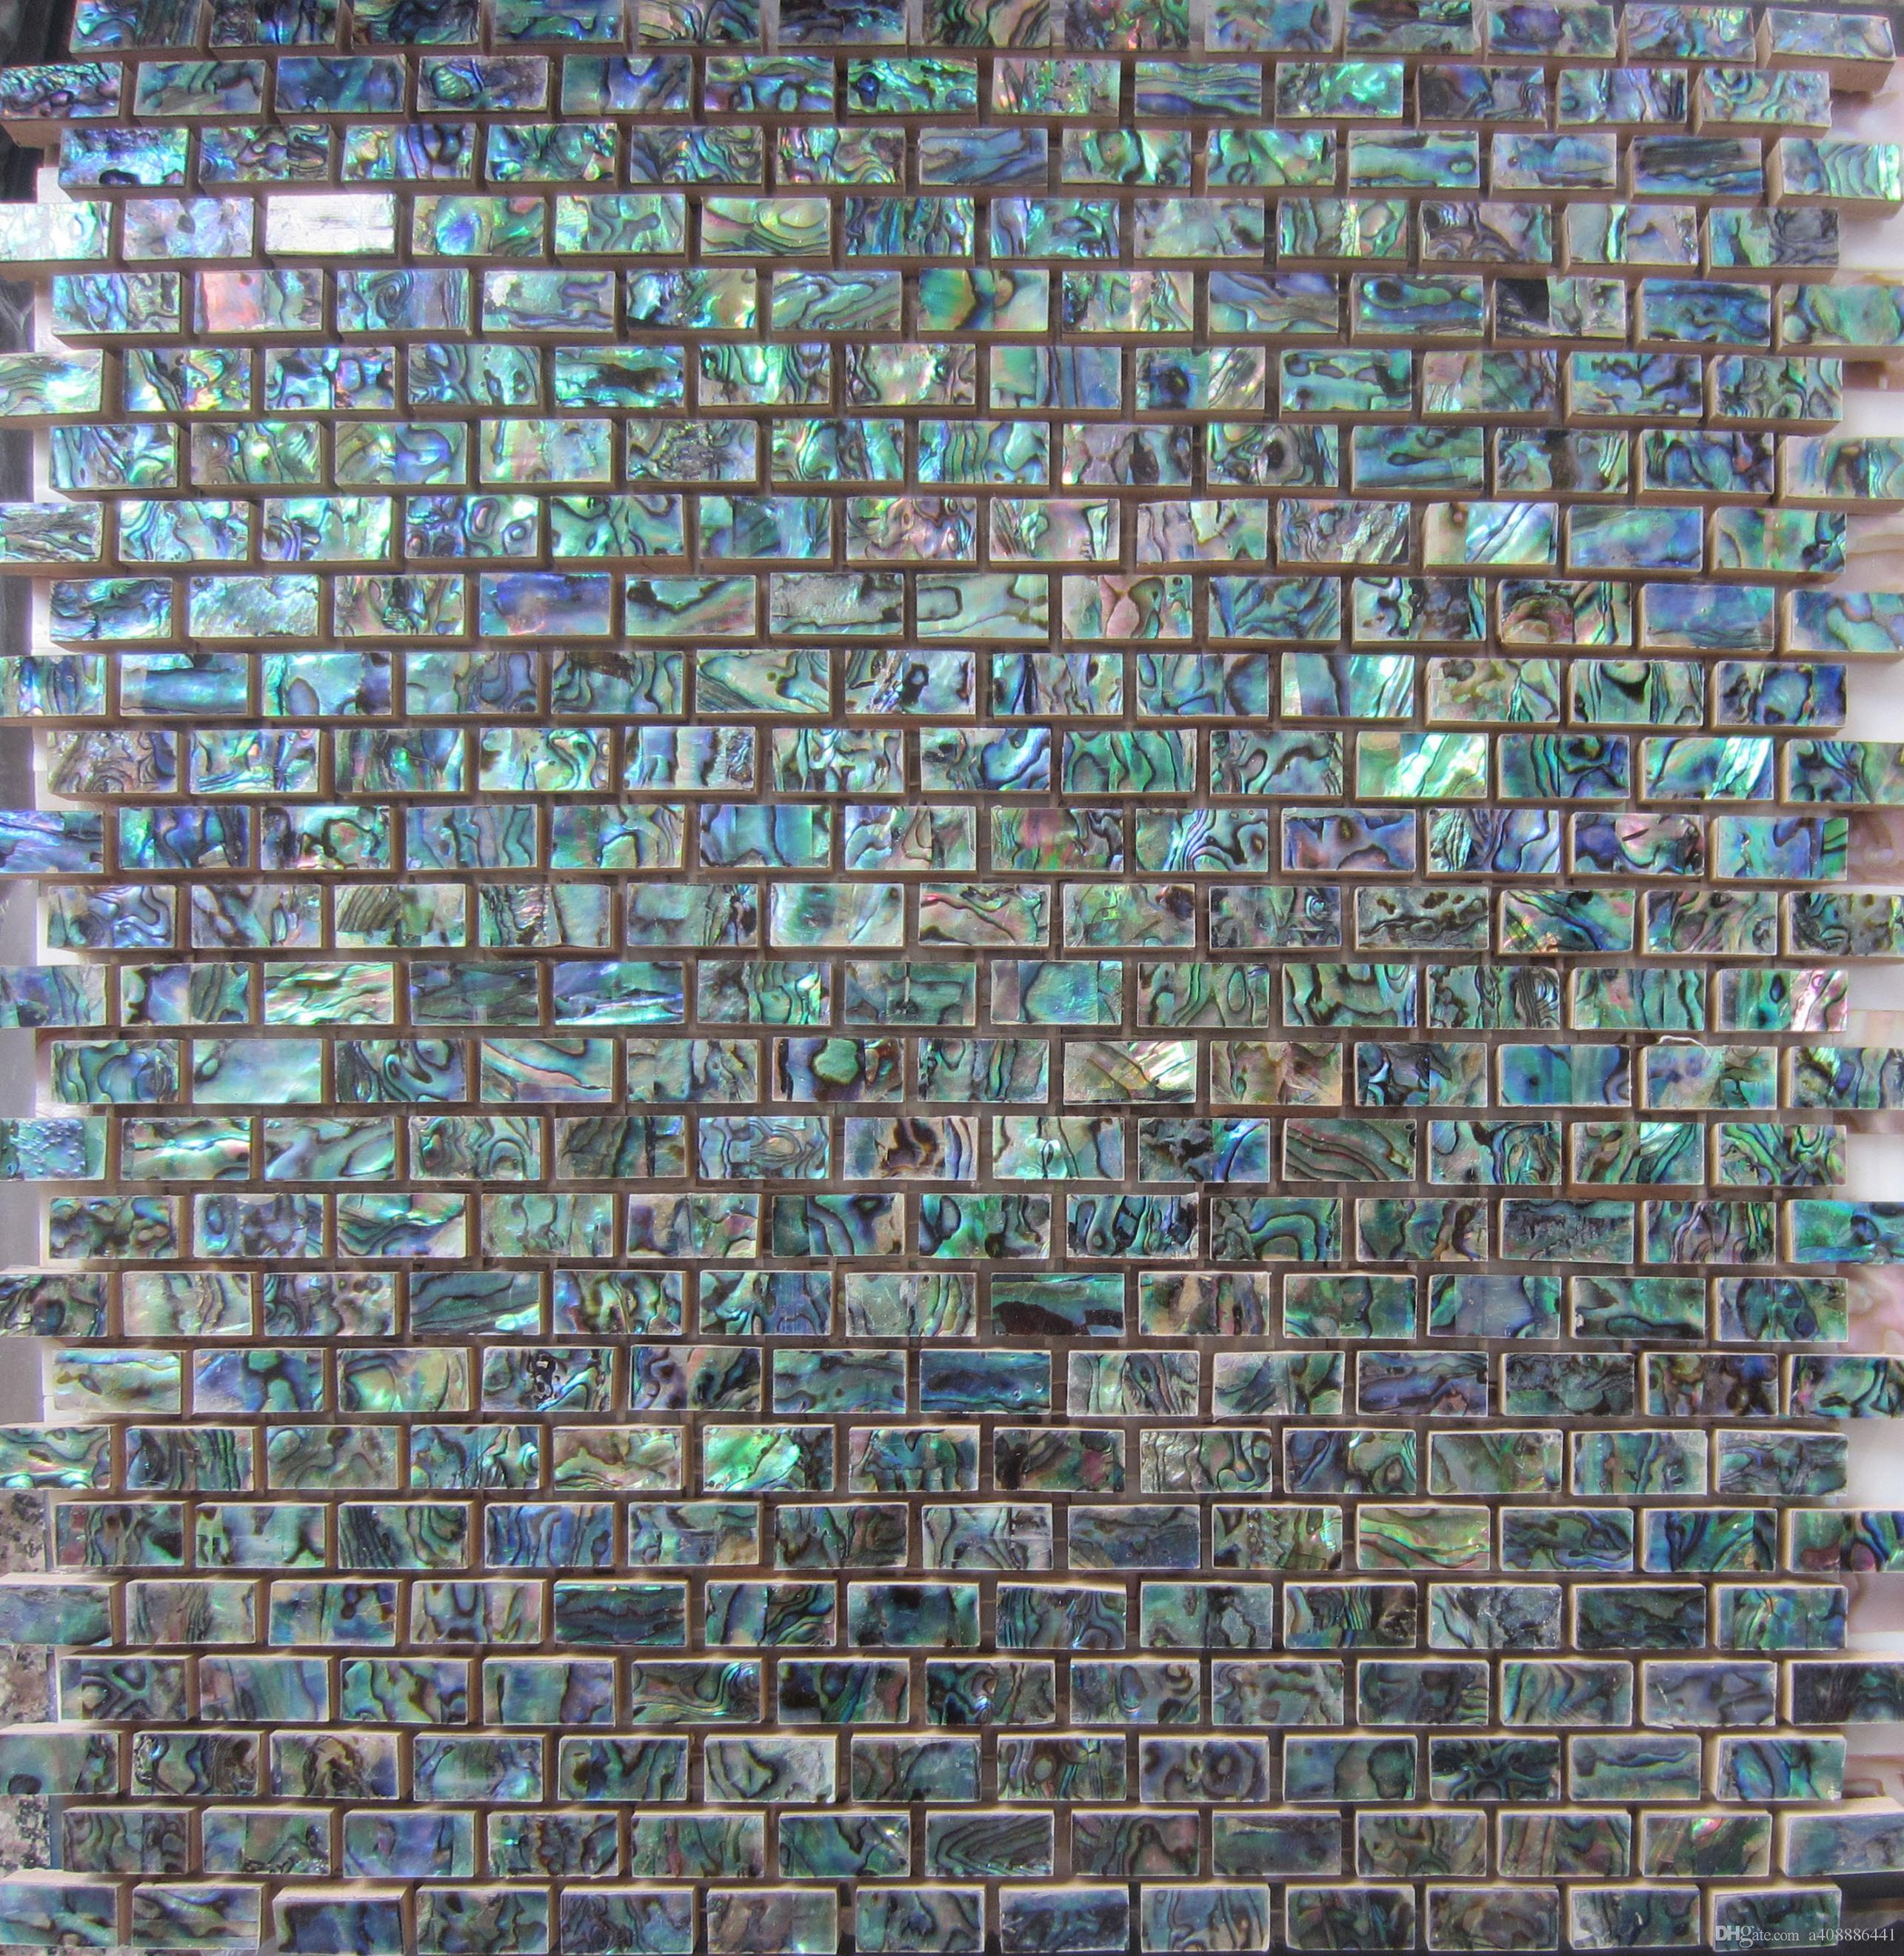 Picture of a wall of tiles made of abalone shells.